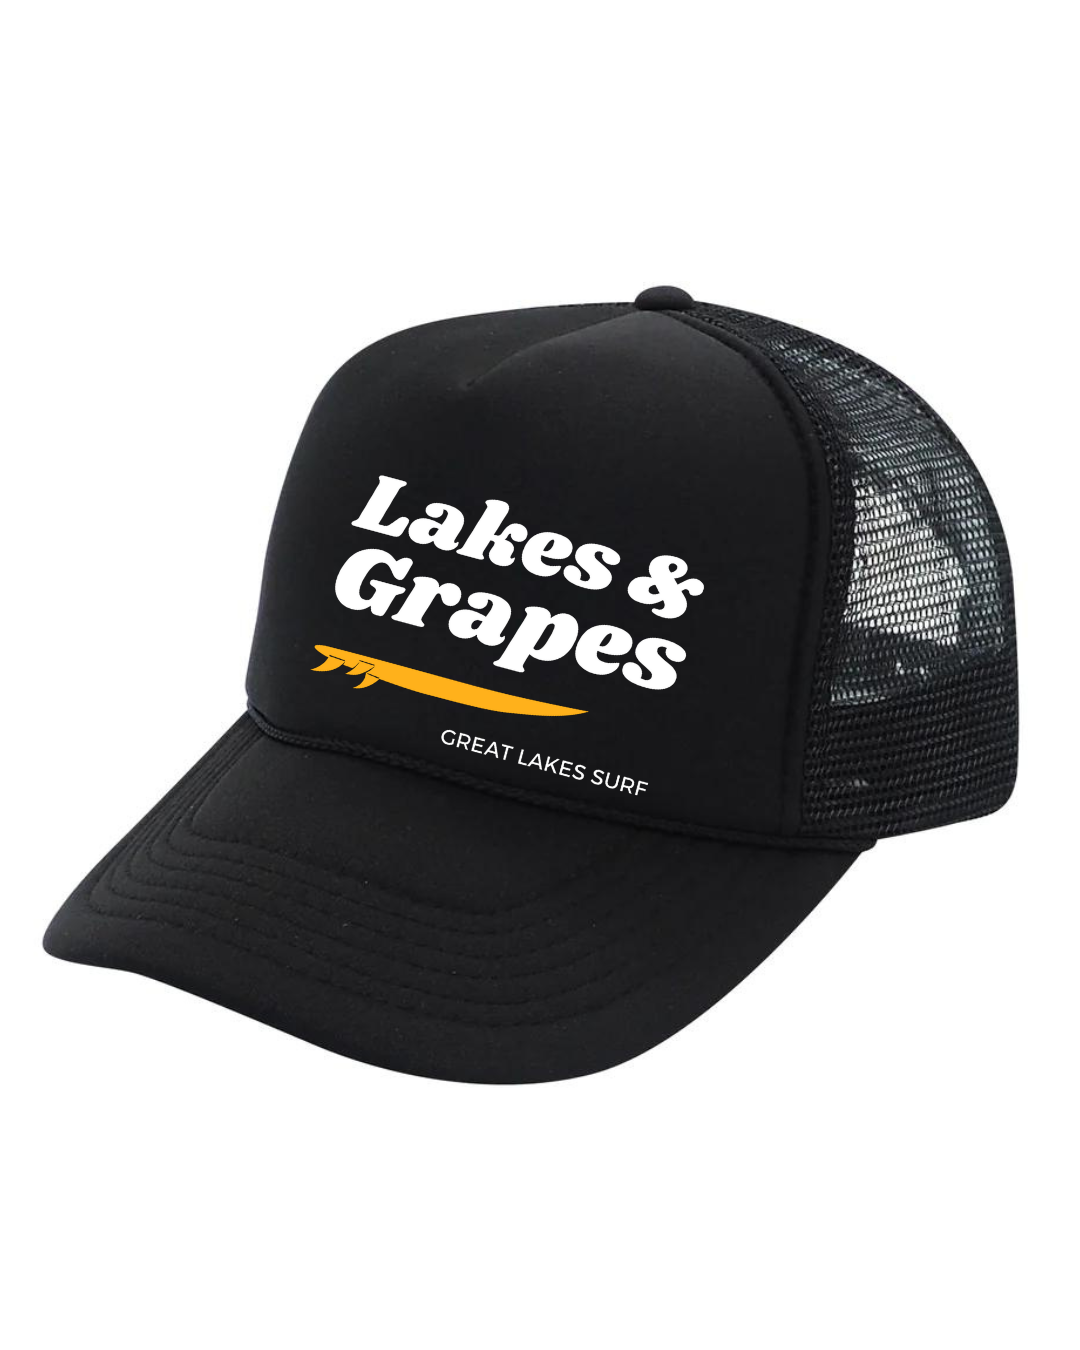 In this image, we see a Lakes and Grapes Black Great Lakes Surf Trucker Hat. Experience comfort and style as you embrace the spirit of the Great Lakes.